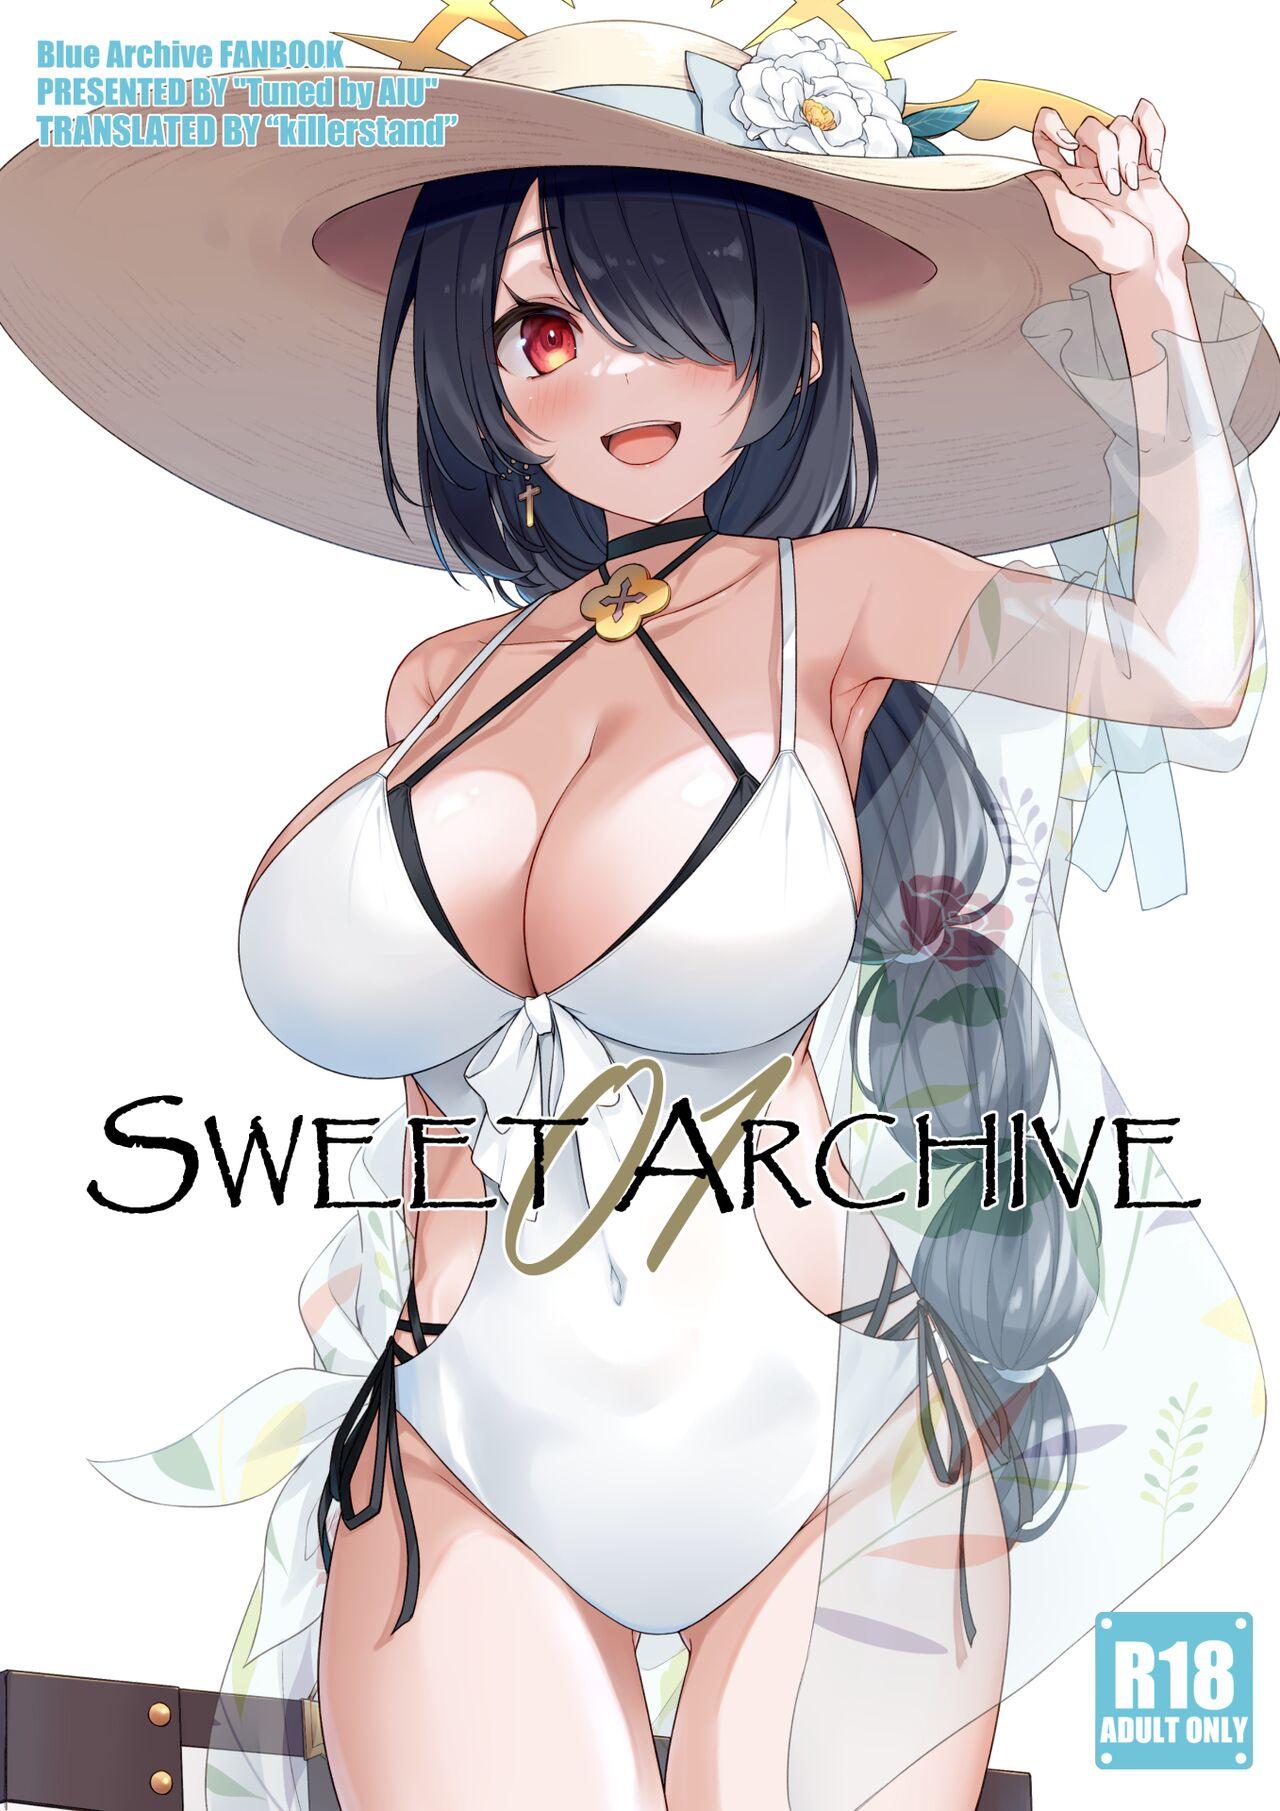 SWEET ARCHIVE 01 [Tuned by AIU (藍兎)] (ブルーアーカイブ) [英訳] [DL版] 0